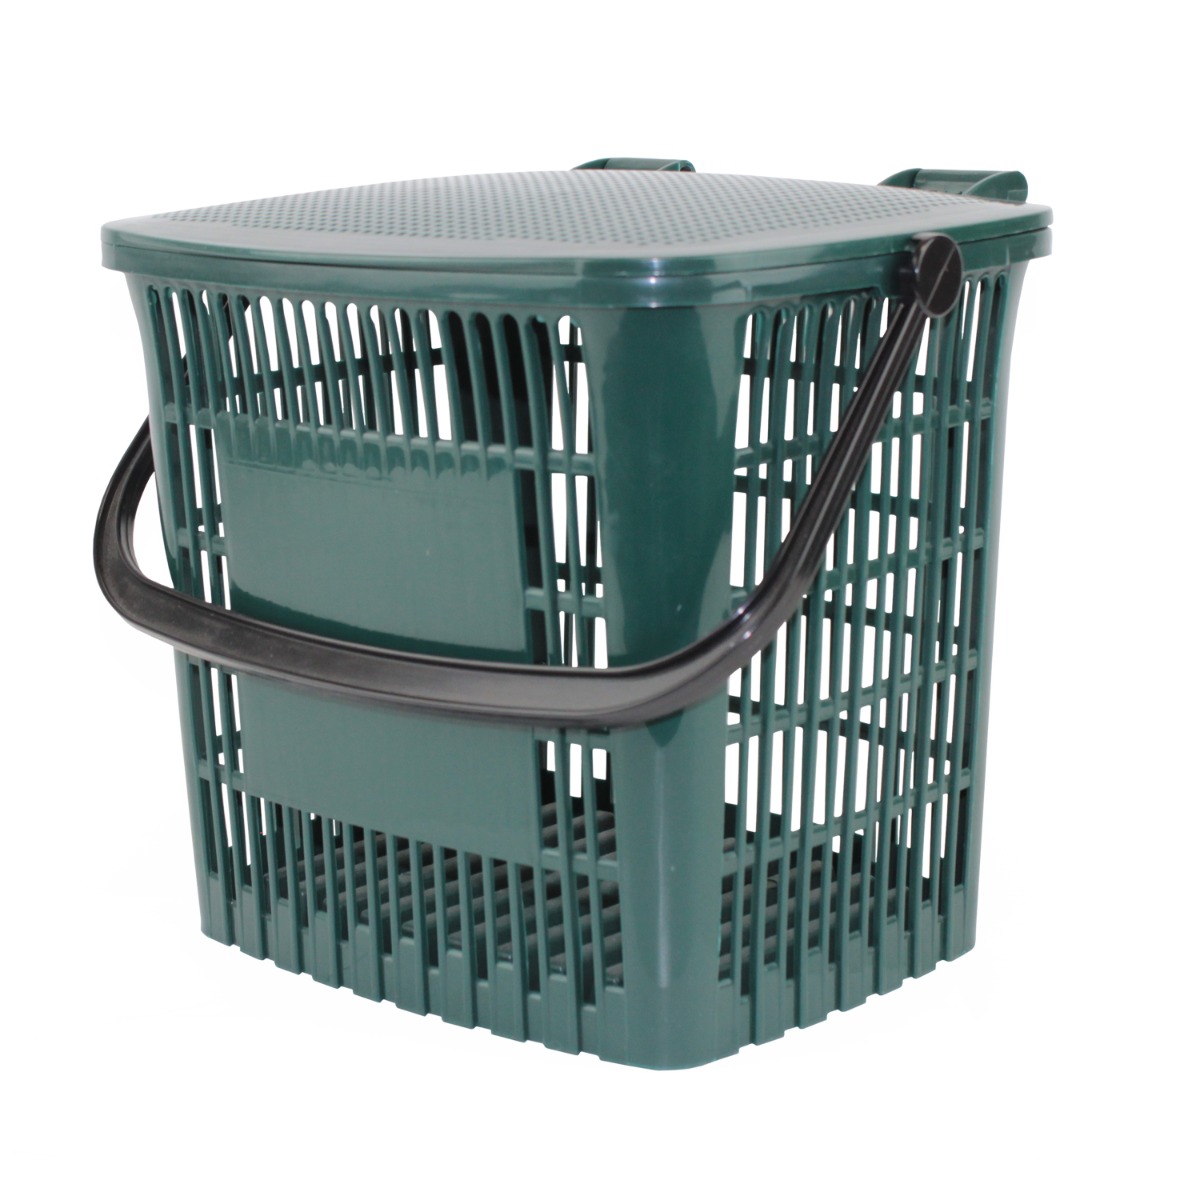 Fully Vented Caddy - Green - 7L size